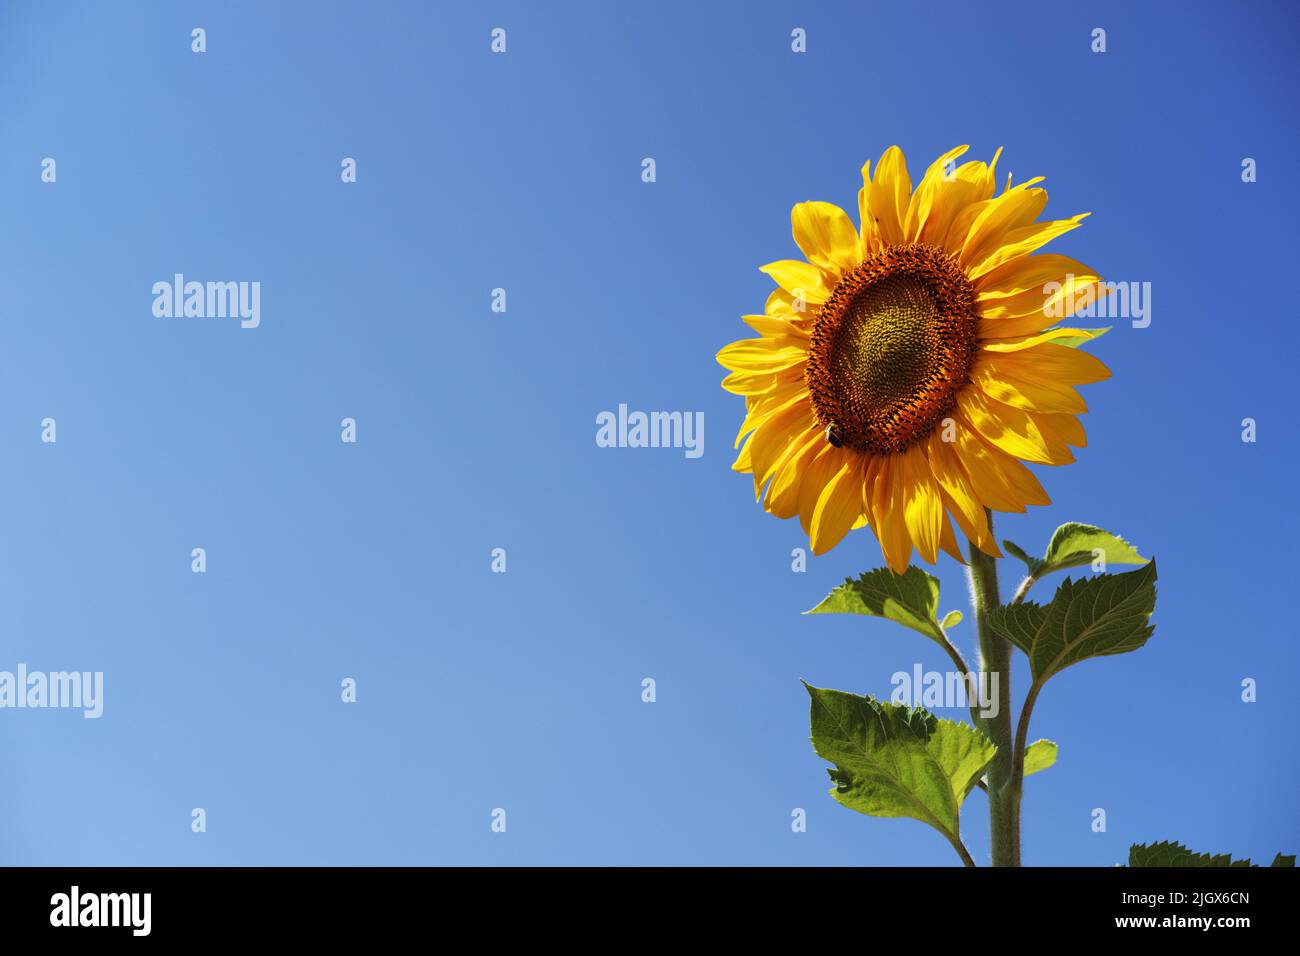 Sunflower over blue sky and little bee on flower Stock Photo